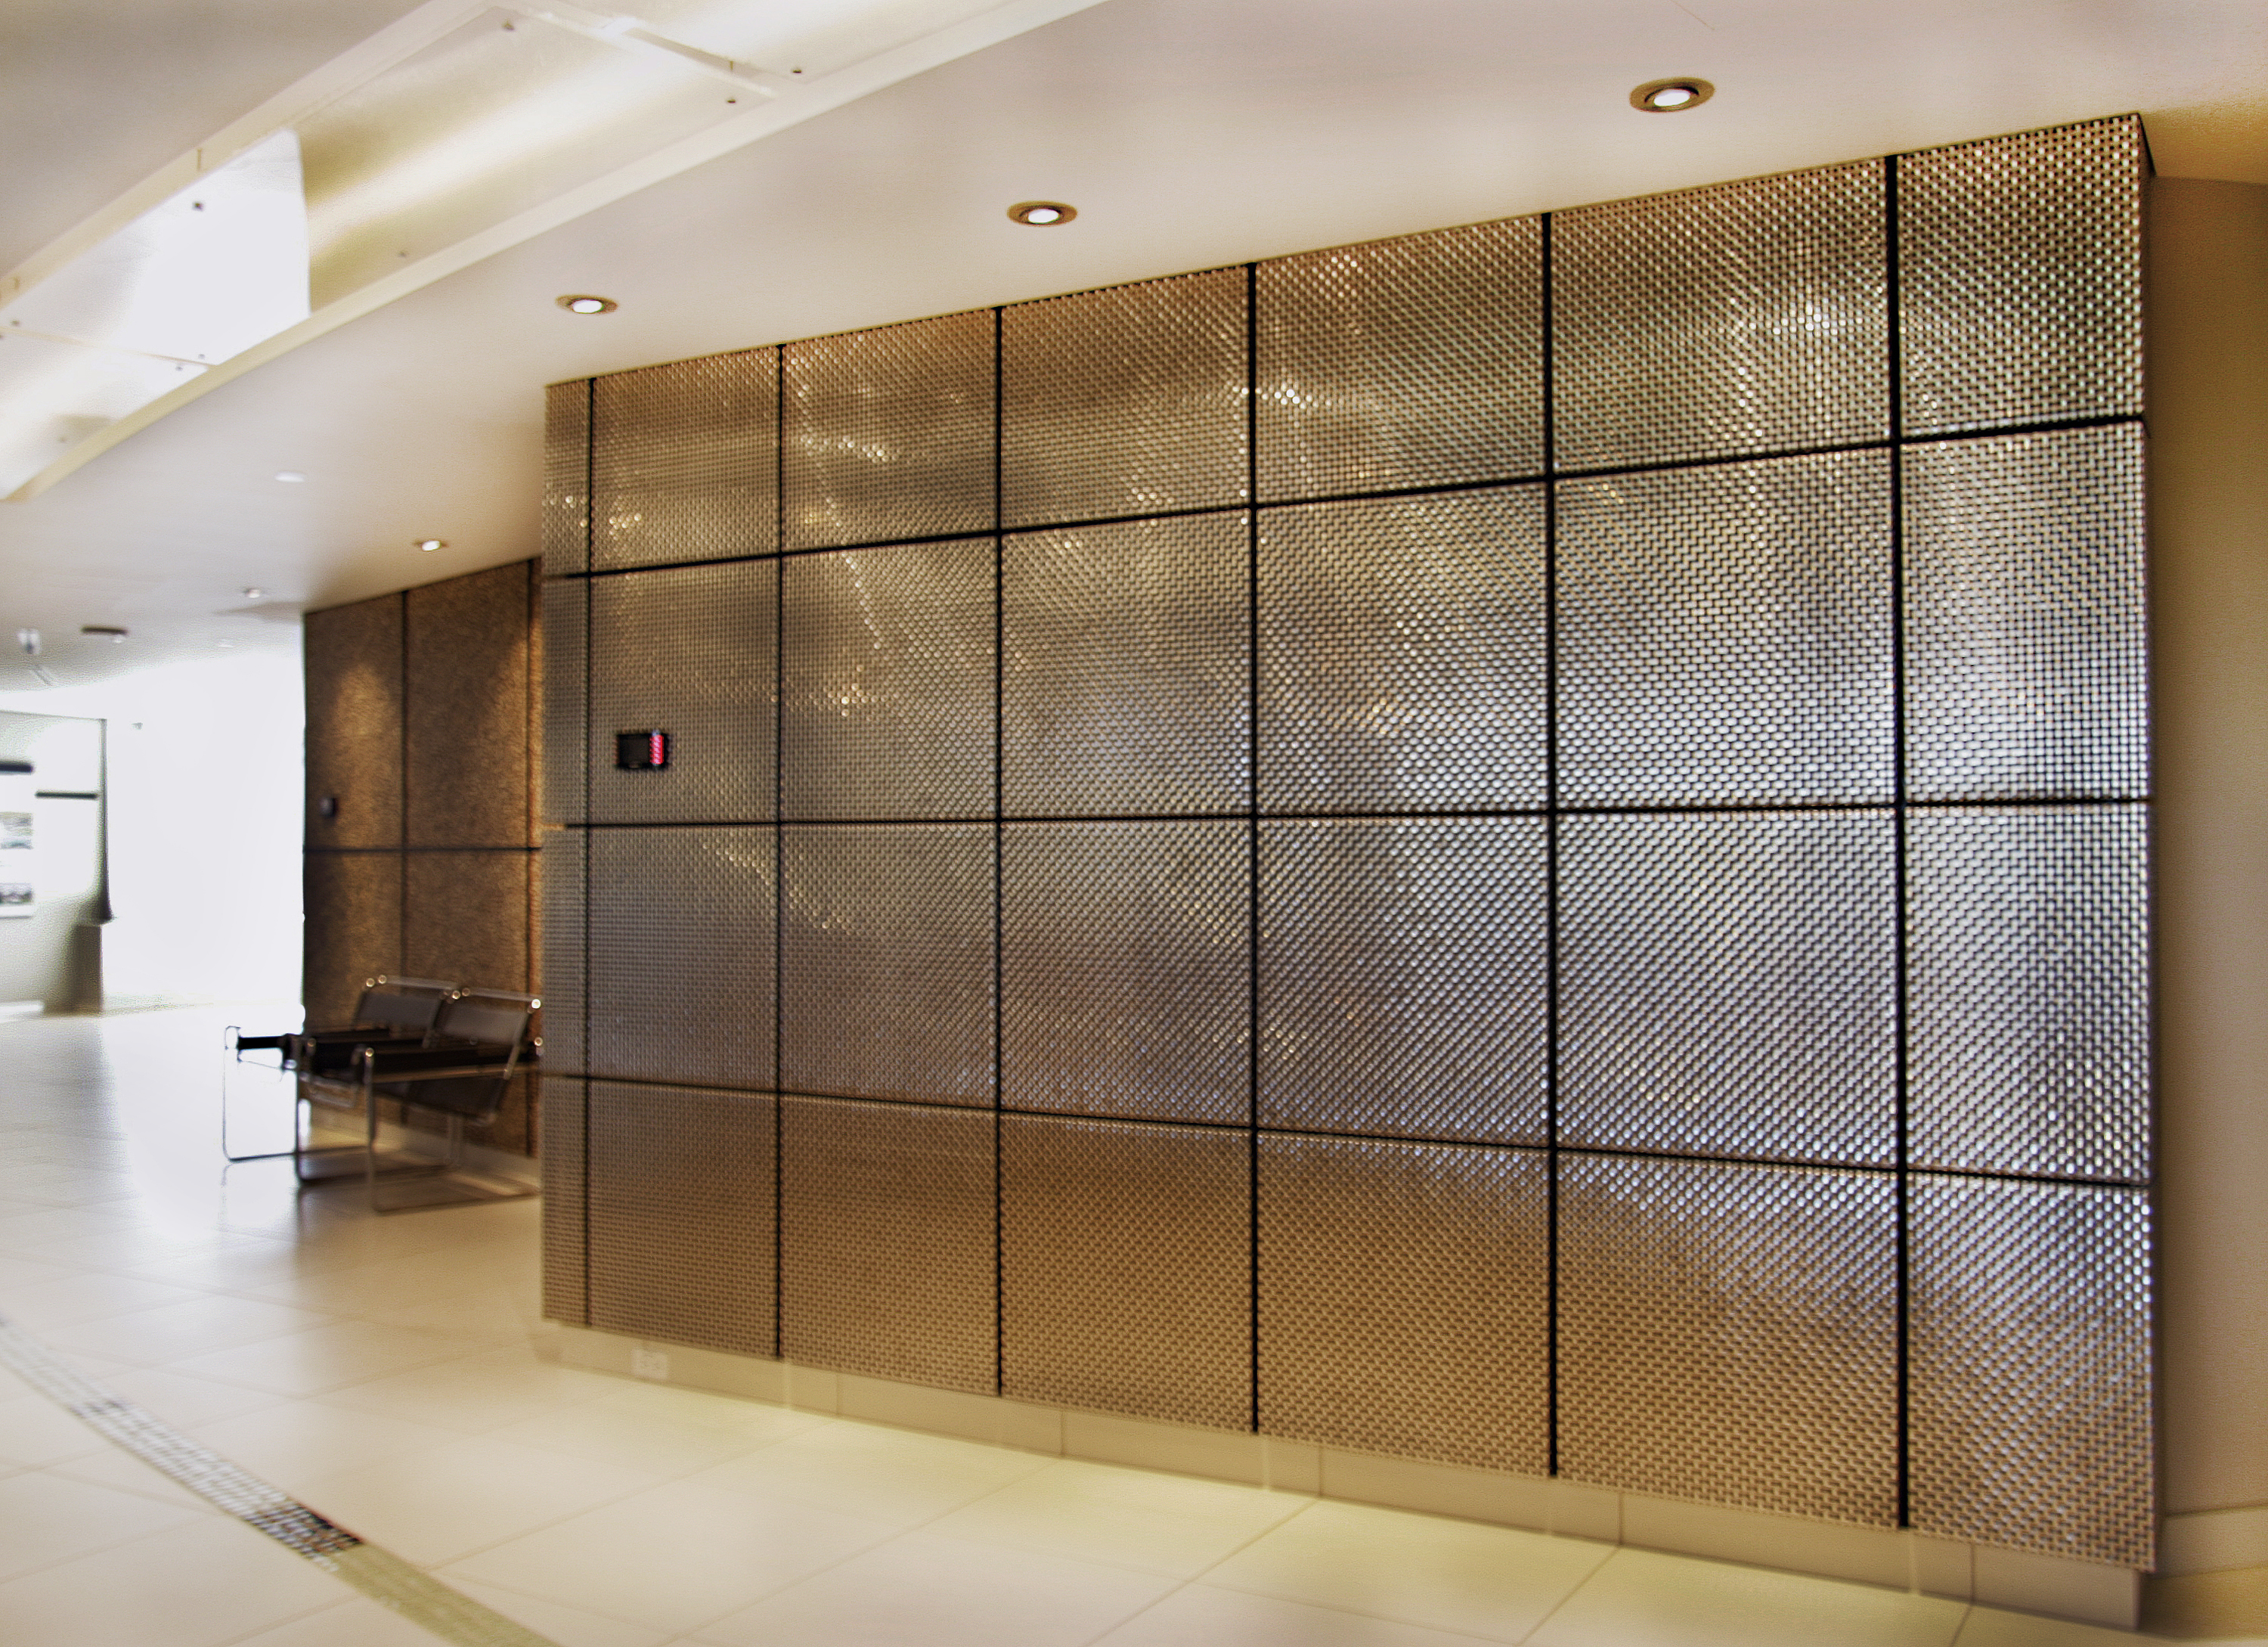 Banker Wire Mesh Inspires at IBI Group Office LarsonO'Brien Pressroom